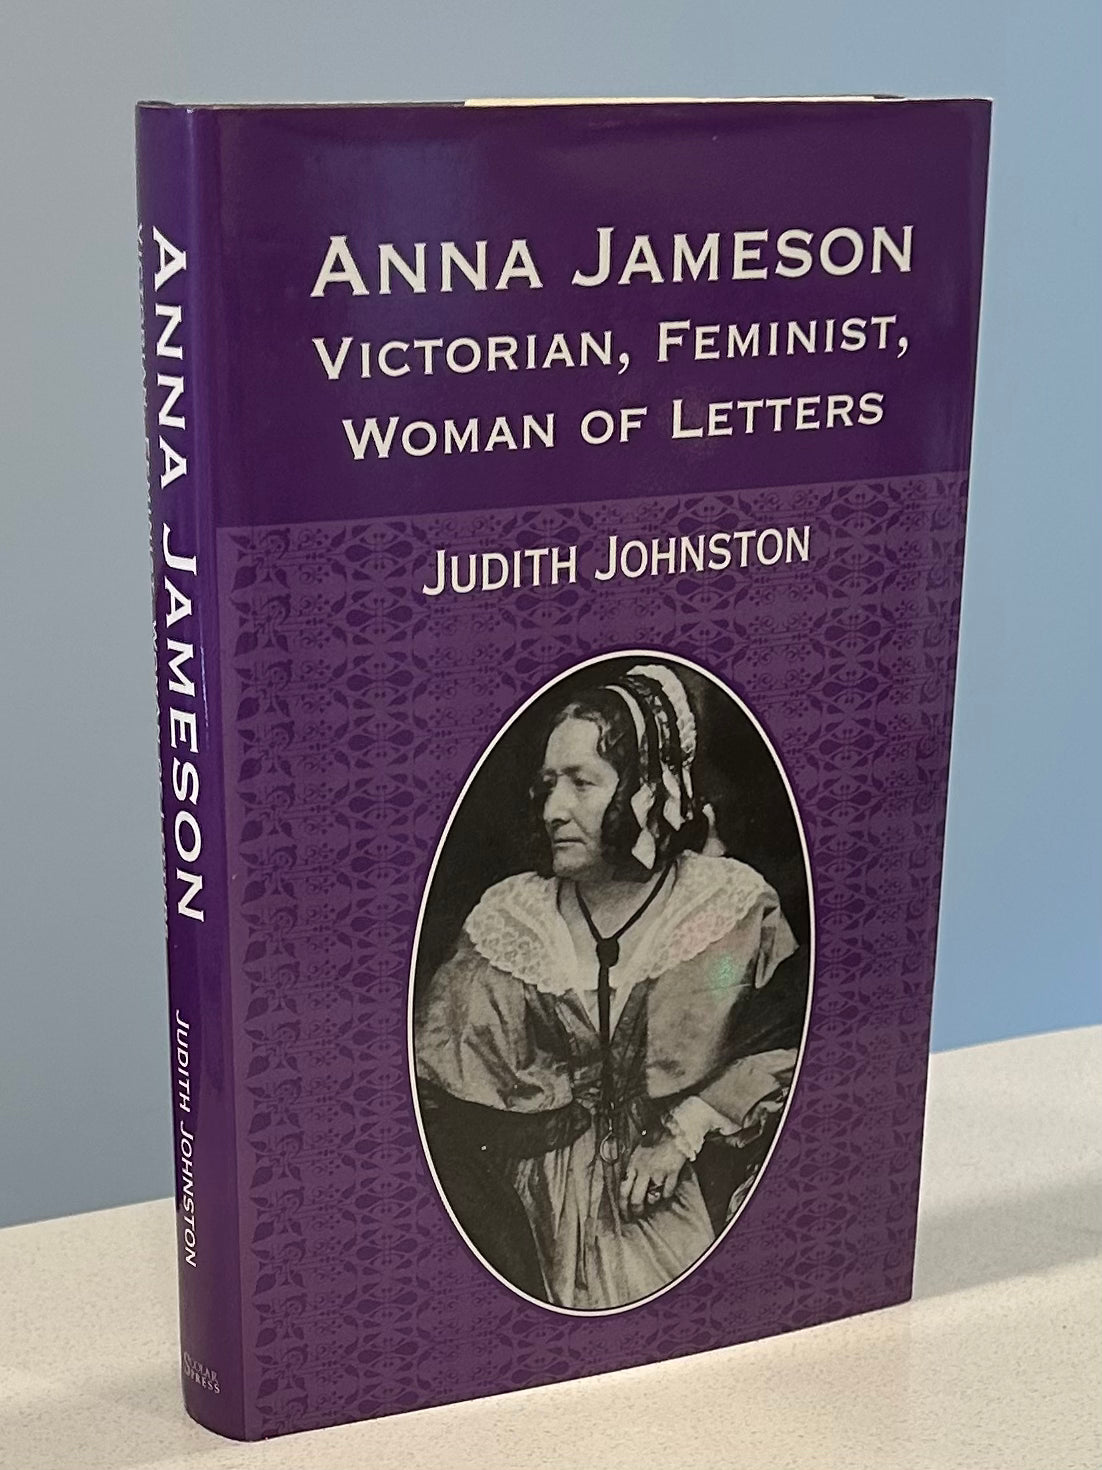 Anna Jameson, Victorian, Feminist, Woman of Letters